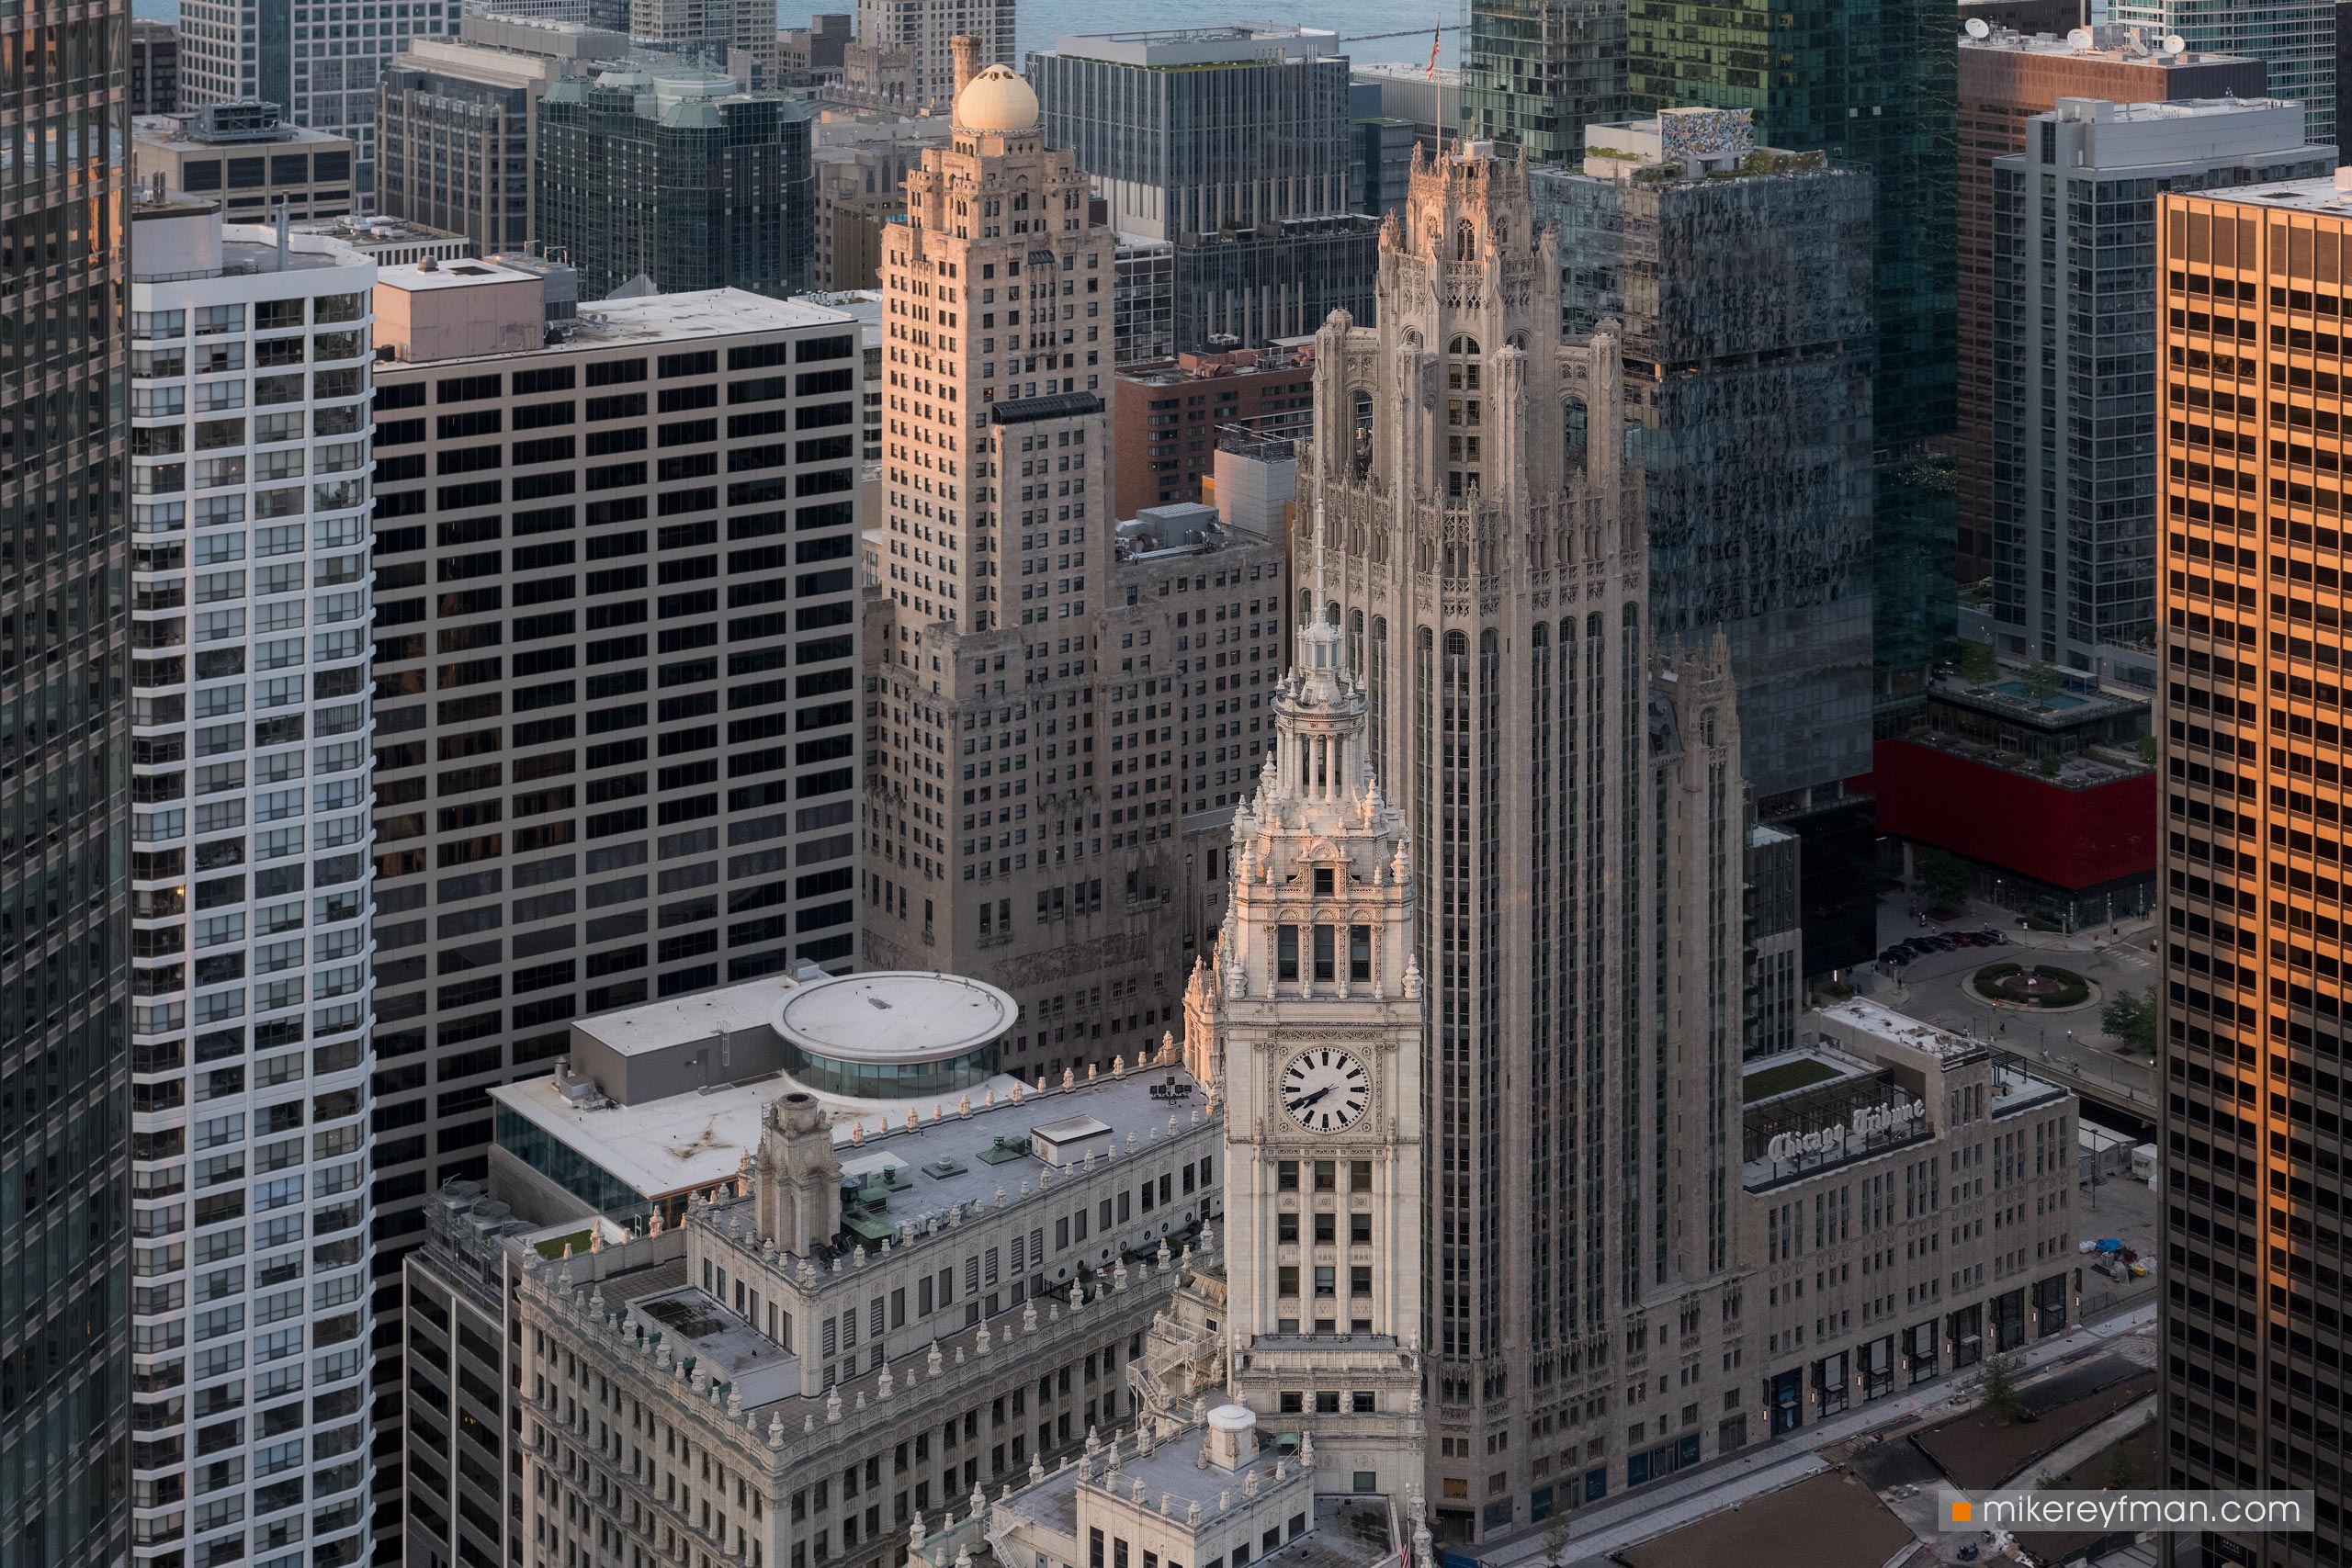 Chicago's Historic Skyscrapers: Wrigley Building, Tribune Tower, and Hotel Inter-Continental. Chicago, Illinois, USA 064-CH-2_ZRA10089 - Ever-beating architectural heart of America. The birthplace of the most iconic buildings in the country. - Mike Reyfman Photography